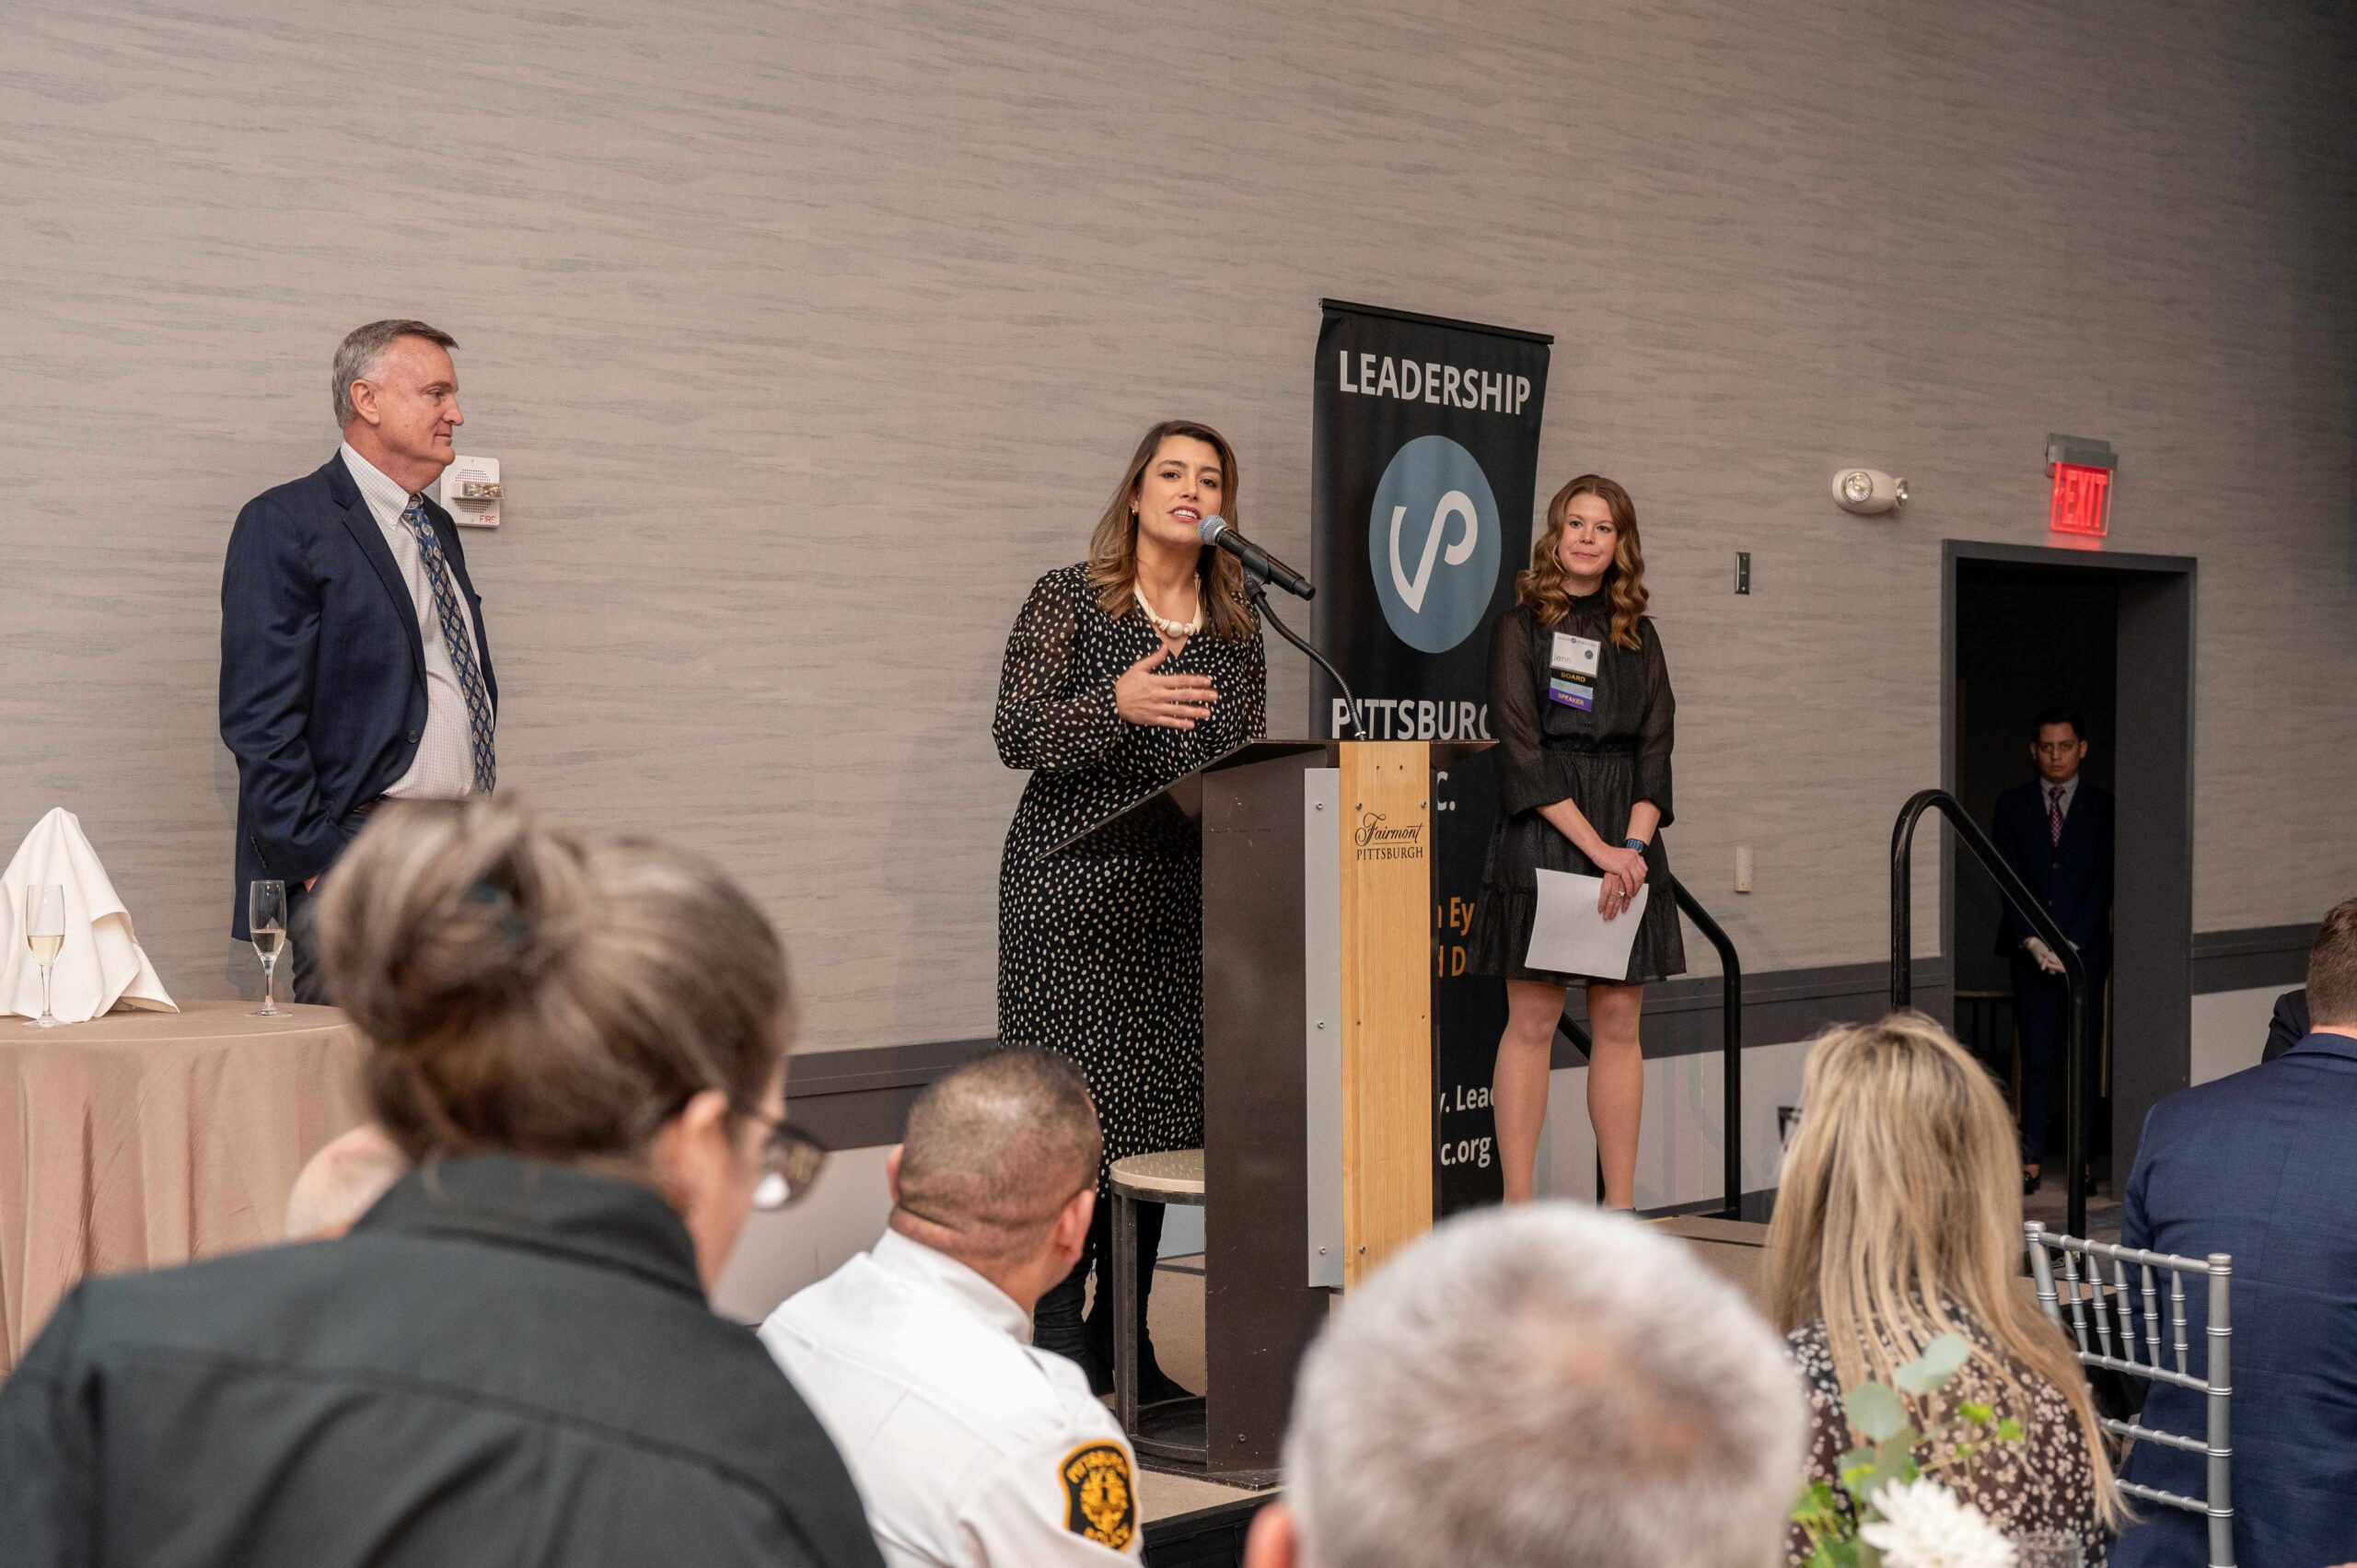 John Olin, CFO of Wabtec, Event Presenting Sponsor and Jenn Beer LDI XVII, YALP IV – Leadership Pittsburgh Inc. President and CEO on stage while Allegheny County Executive Sara Innamorato provides remarks.